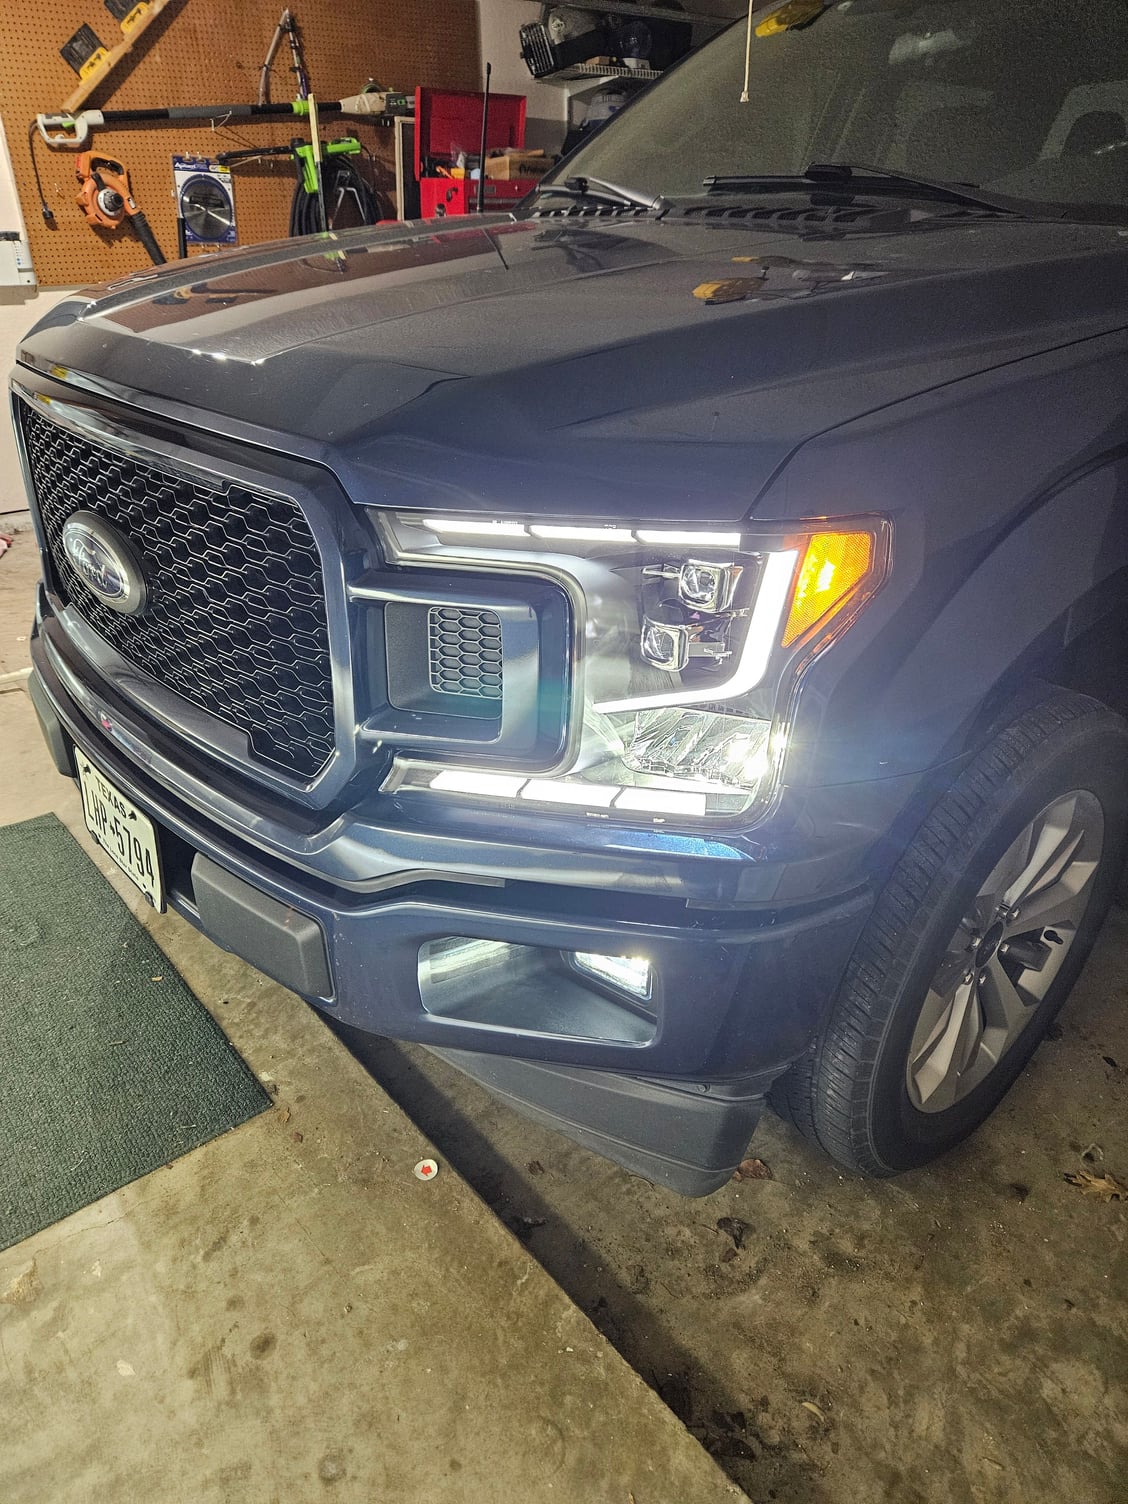 headlight issues - Ford F150 Forum - Community of Ford Truck Fans